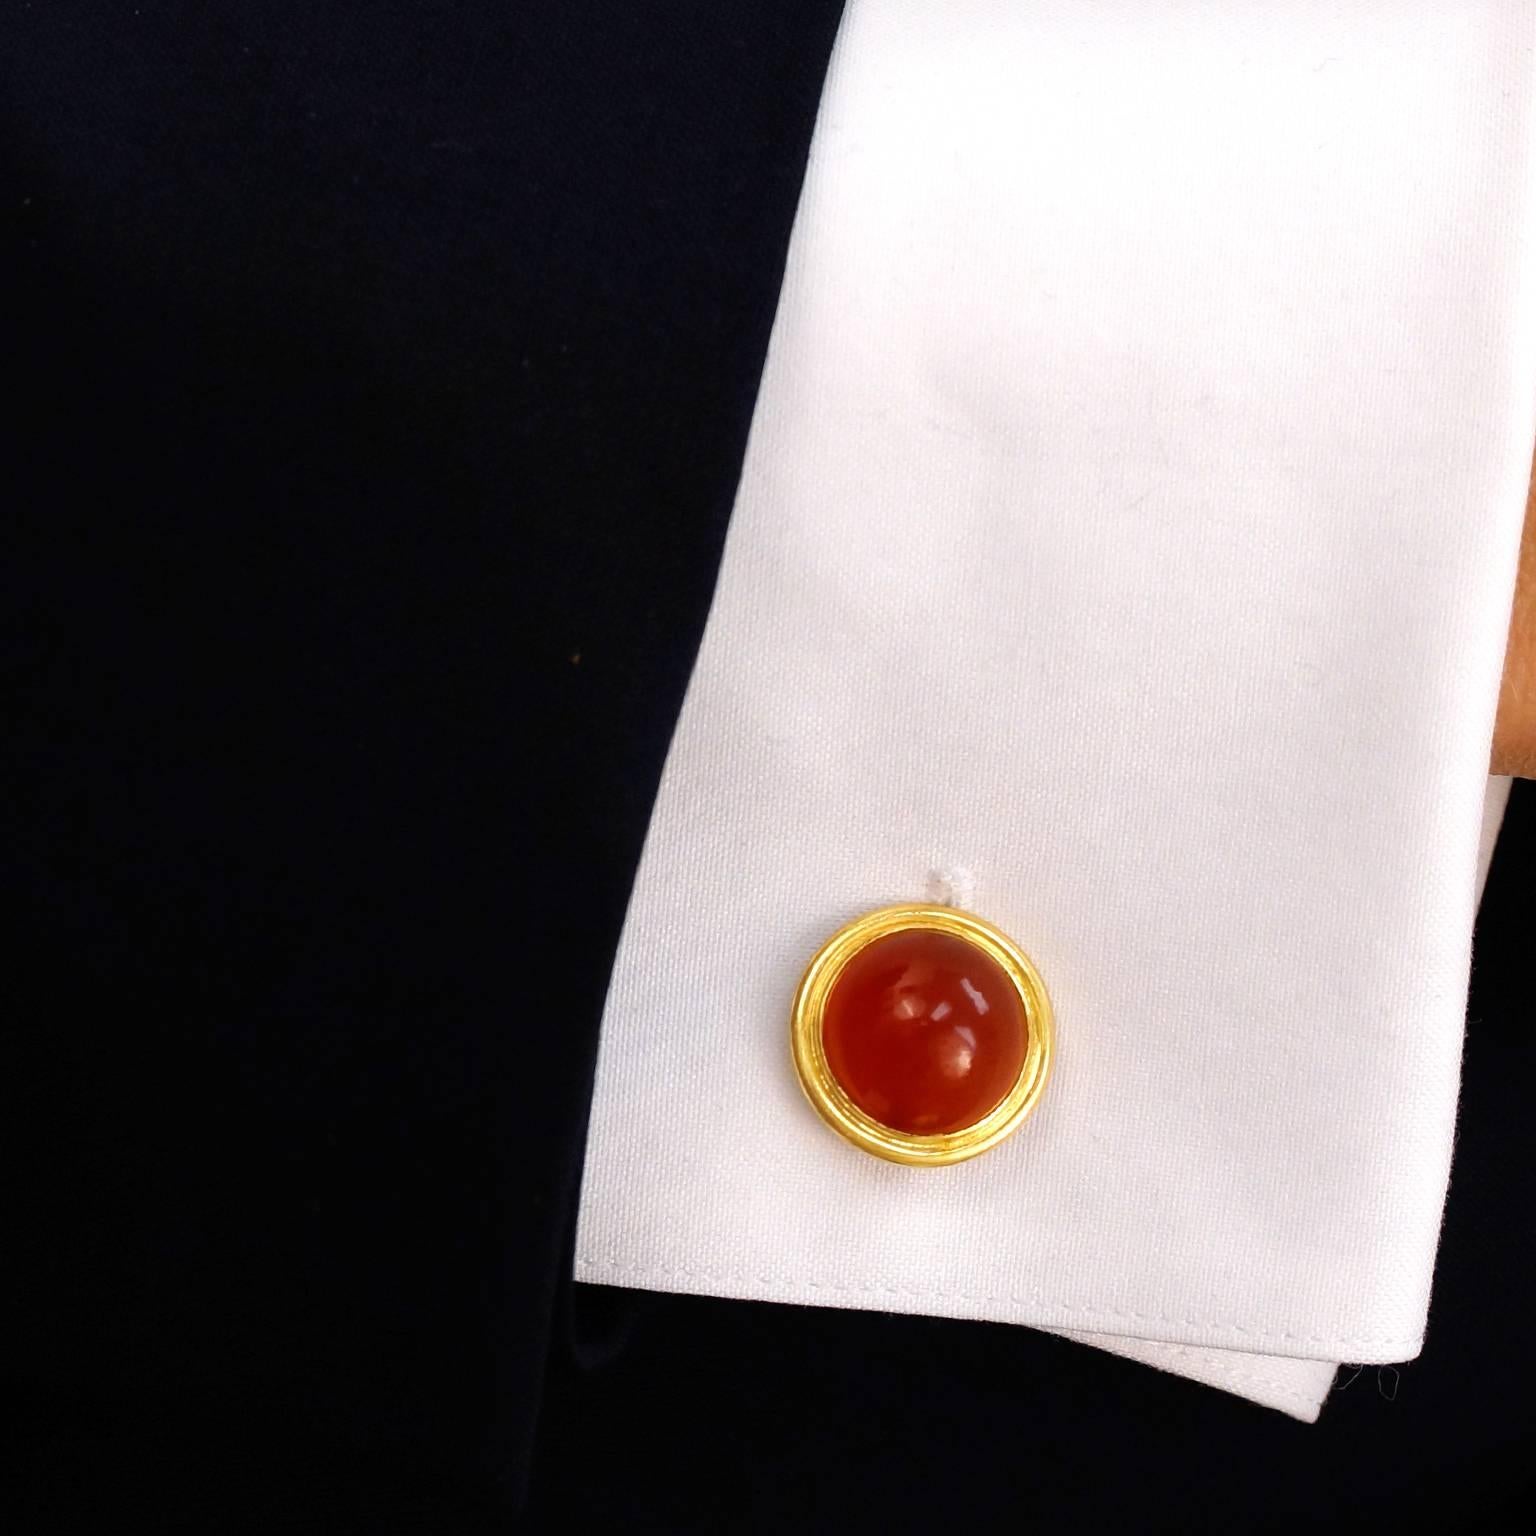 Circa 1950s, 18k.  These sleekly elegant cufflinks are made in polished eighteen-karat yellow gold, impeccably framing vibrant carnelian cabochons.  Well-made and in excellent condition, they will add the perfect dash of color to any suit. 
